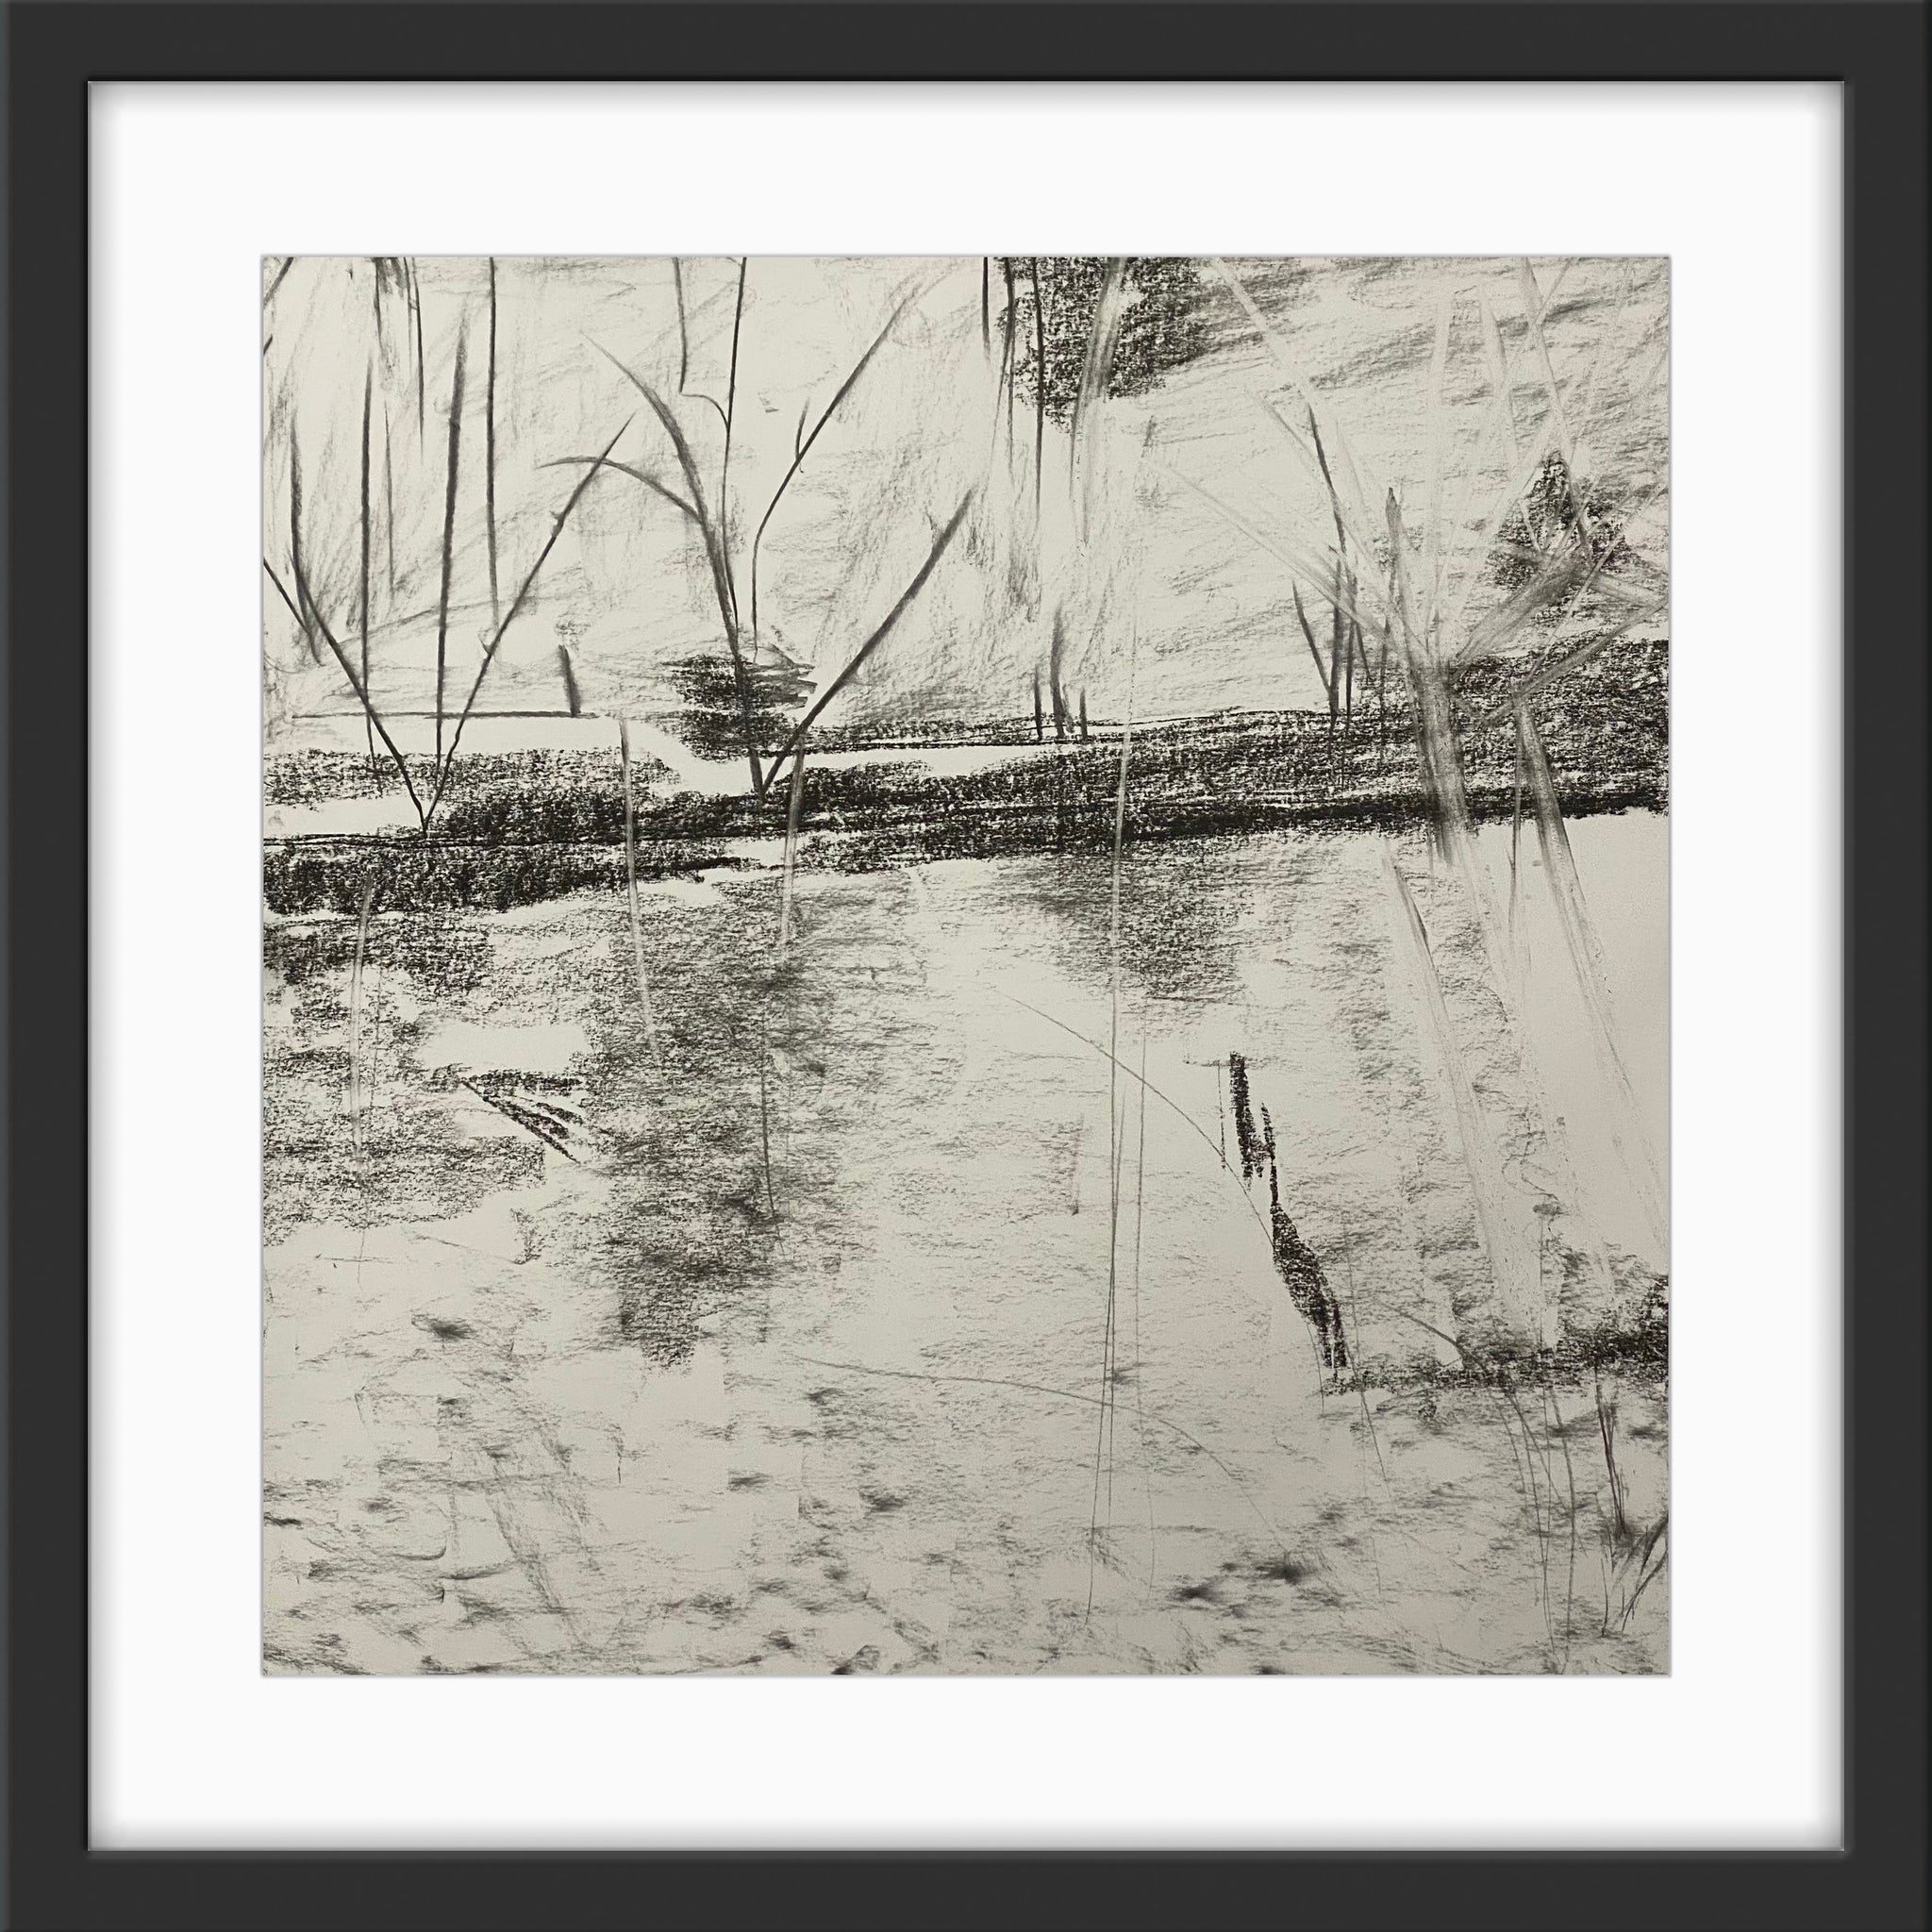 Juanita Bellavance, Spring foliage rising concept drawing, From the Chestatee collection, 2021, Charcoal, 24 x 24 inches.